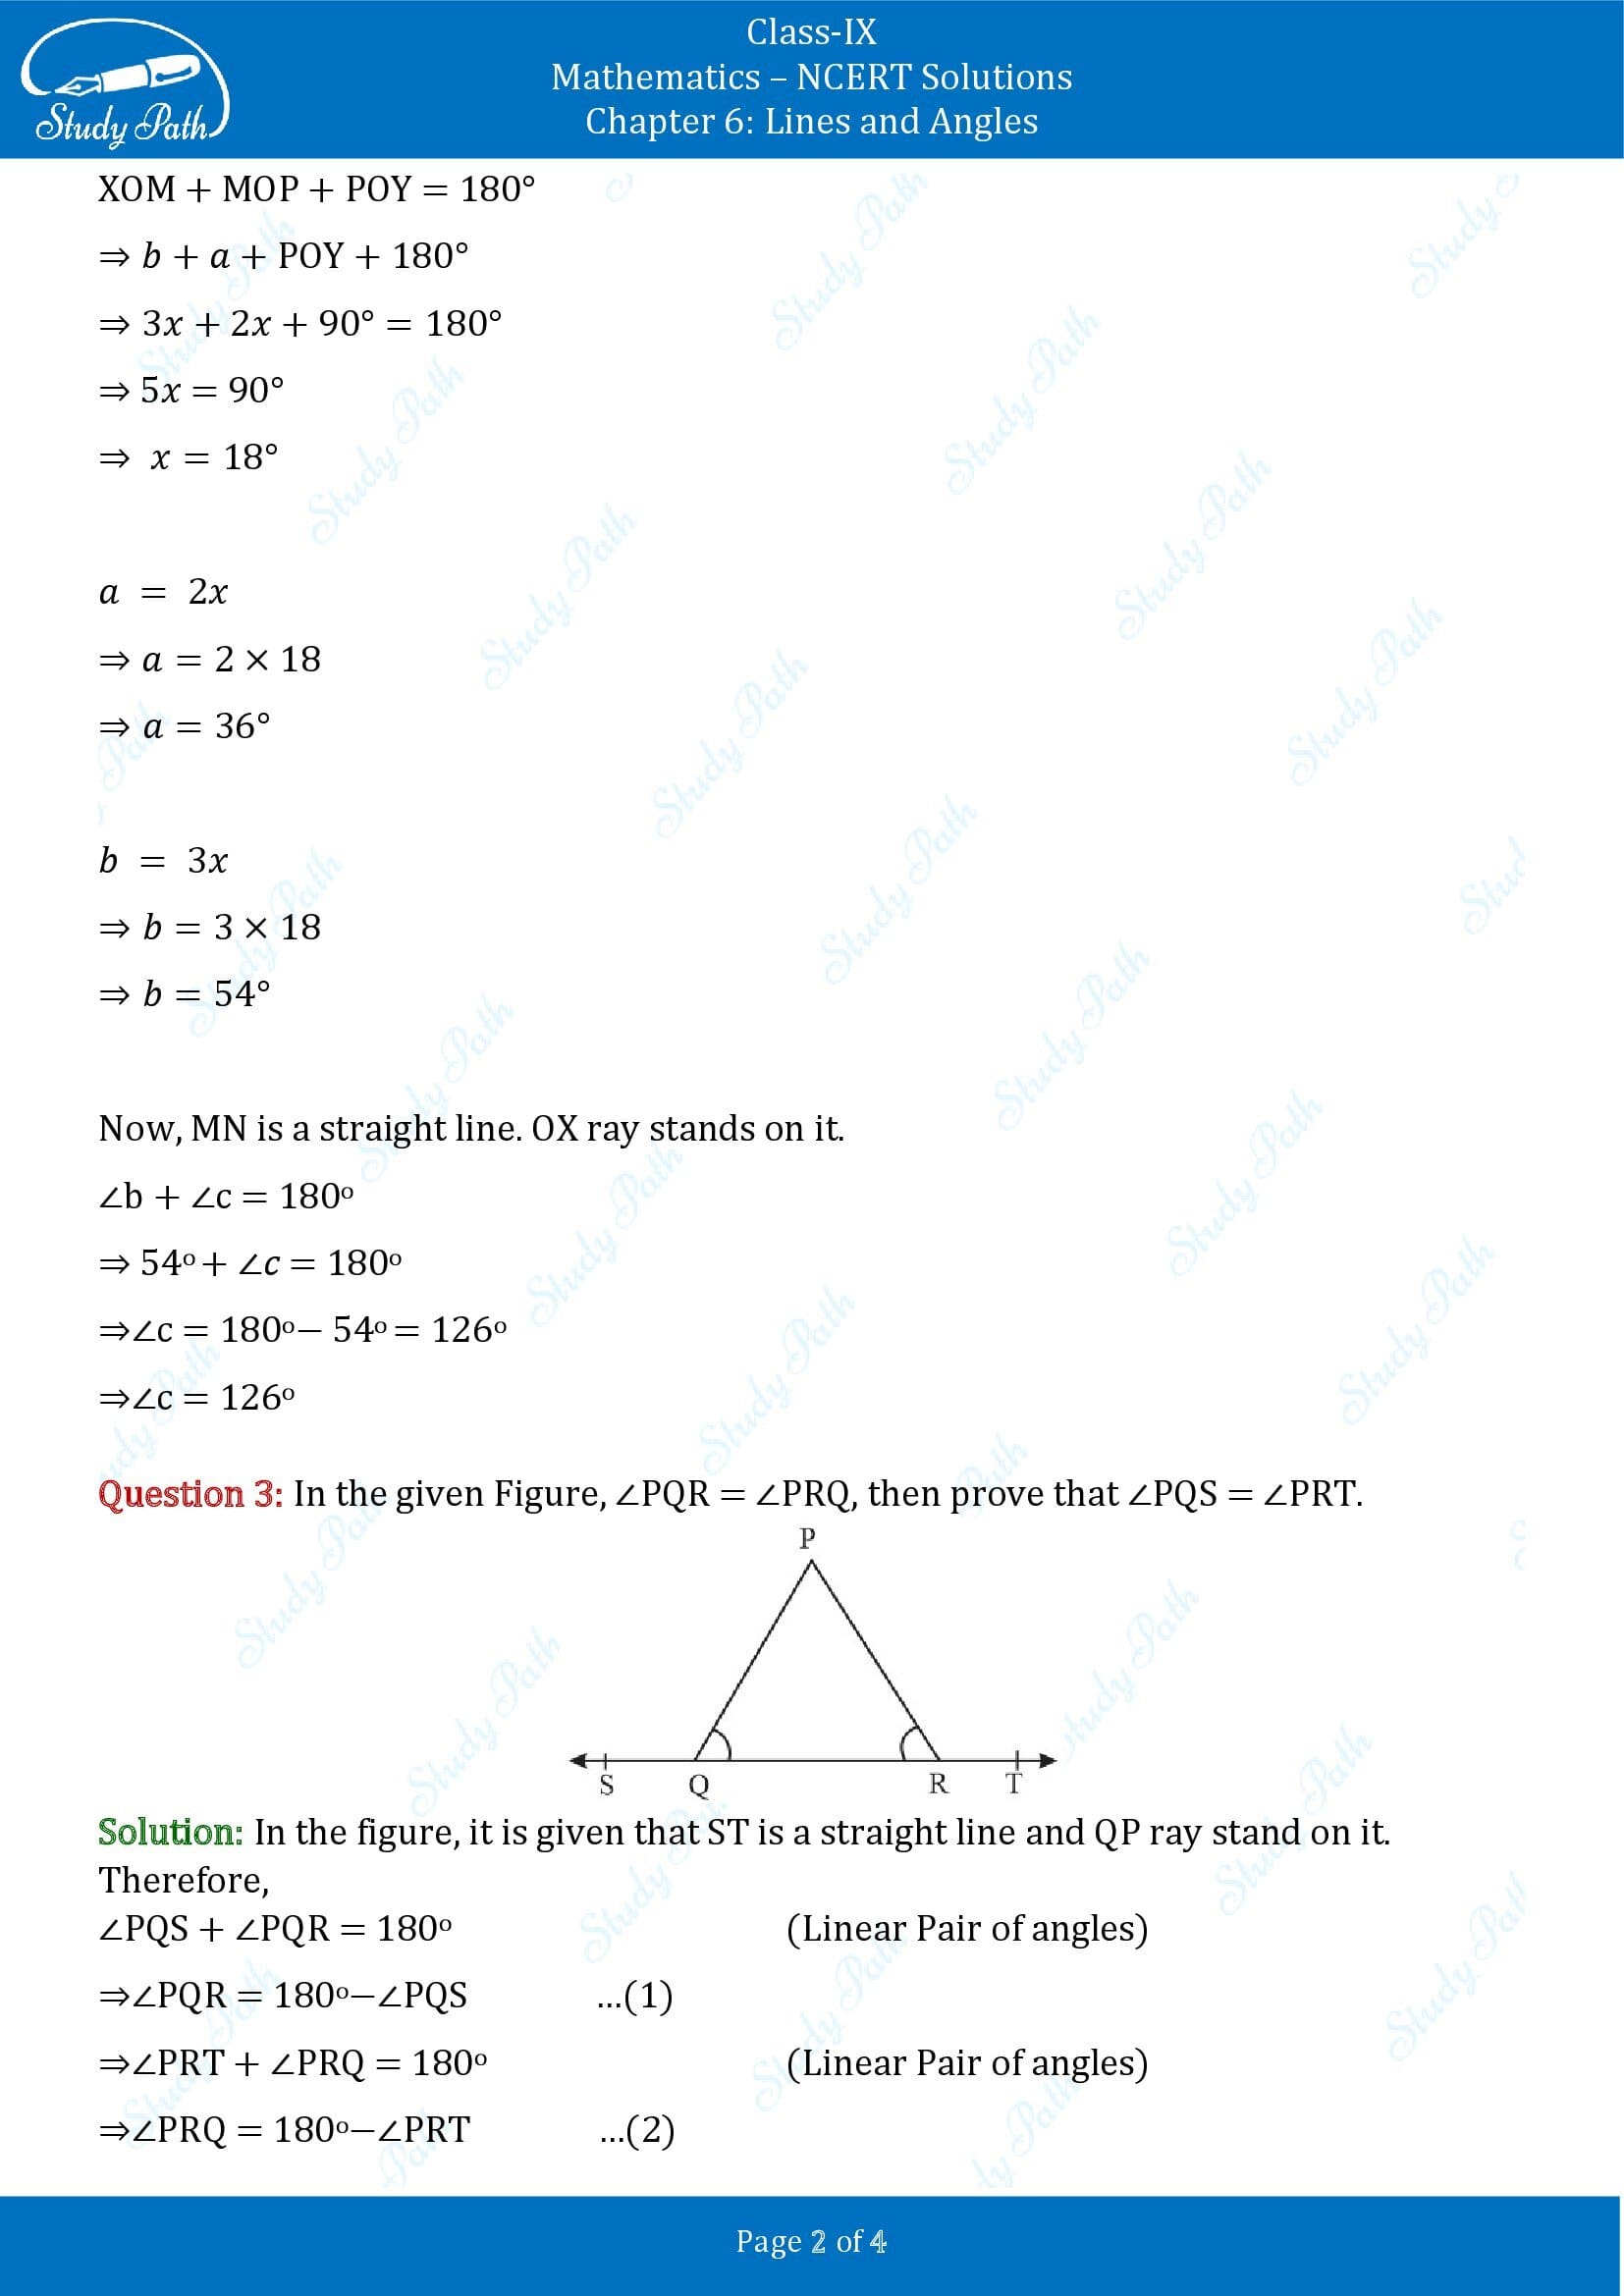 NCERT Solutions for Class 9 Maths Chapter 6 Lines and Angles Exercise 6.1 00002